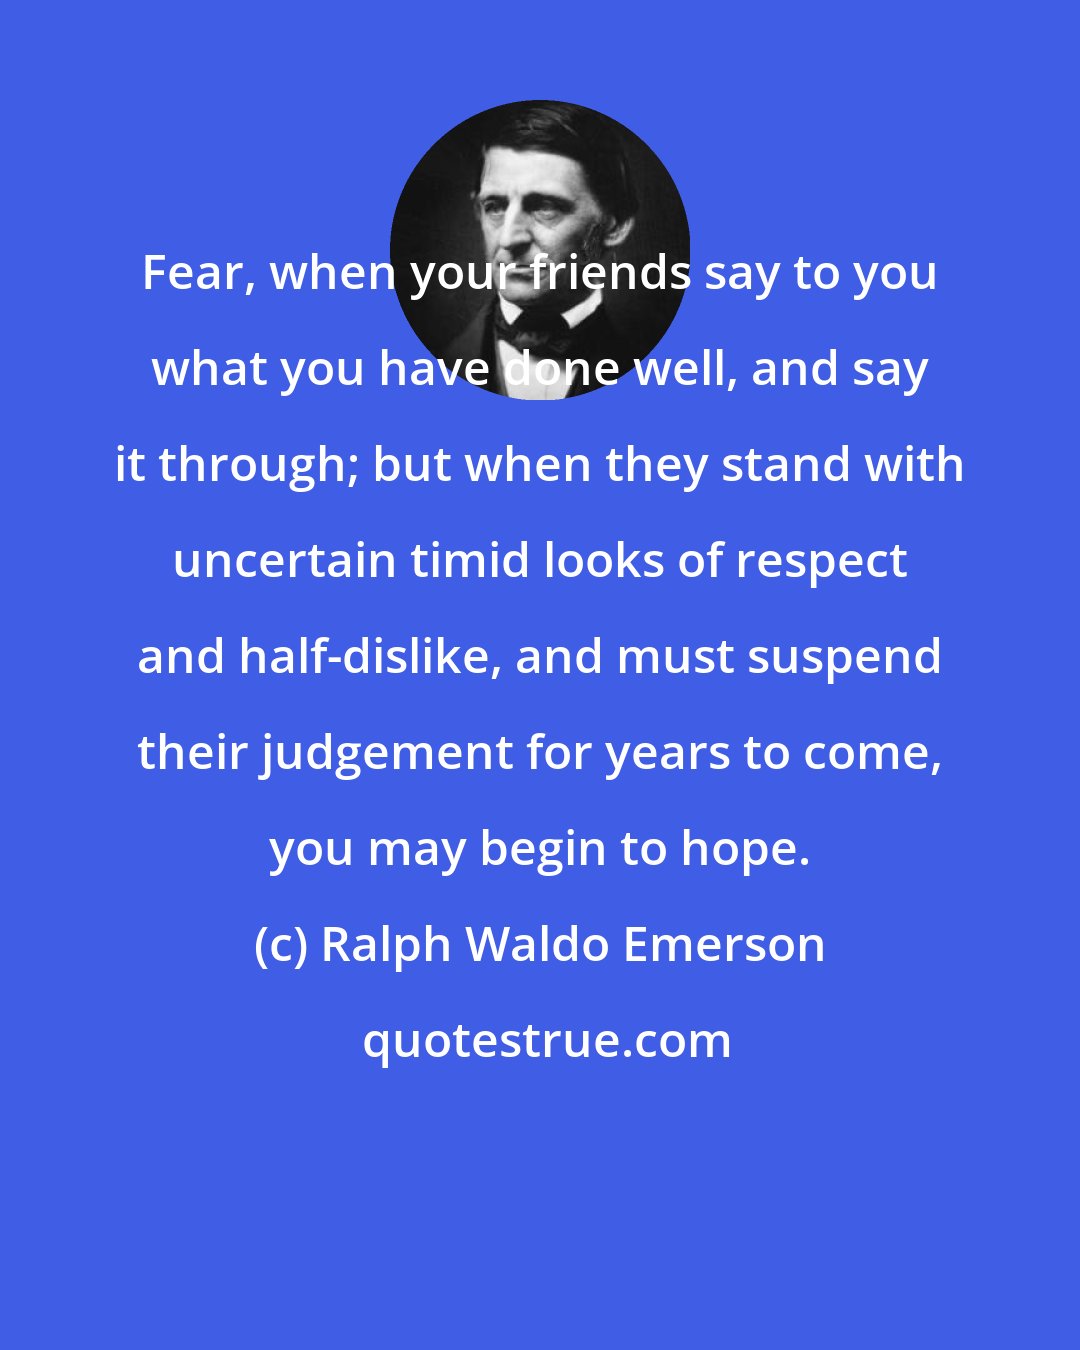 Ralph Waldo Emerson: Fear, when your friends say to you what you have done well, and say it through; but when they stand with uncertain timid looks of respect and half-dislike, and must suspend their judgement for years to come, you may begin to hope.